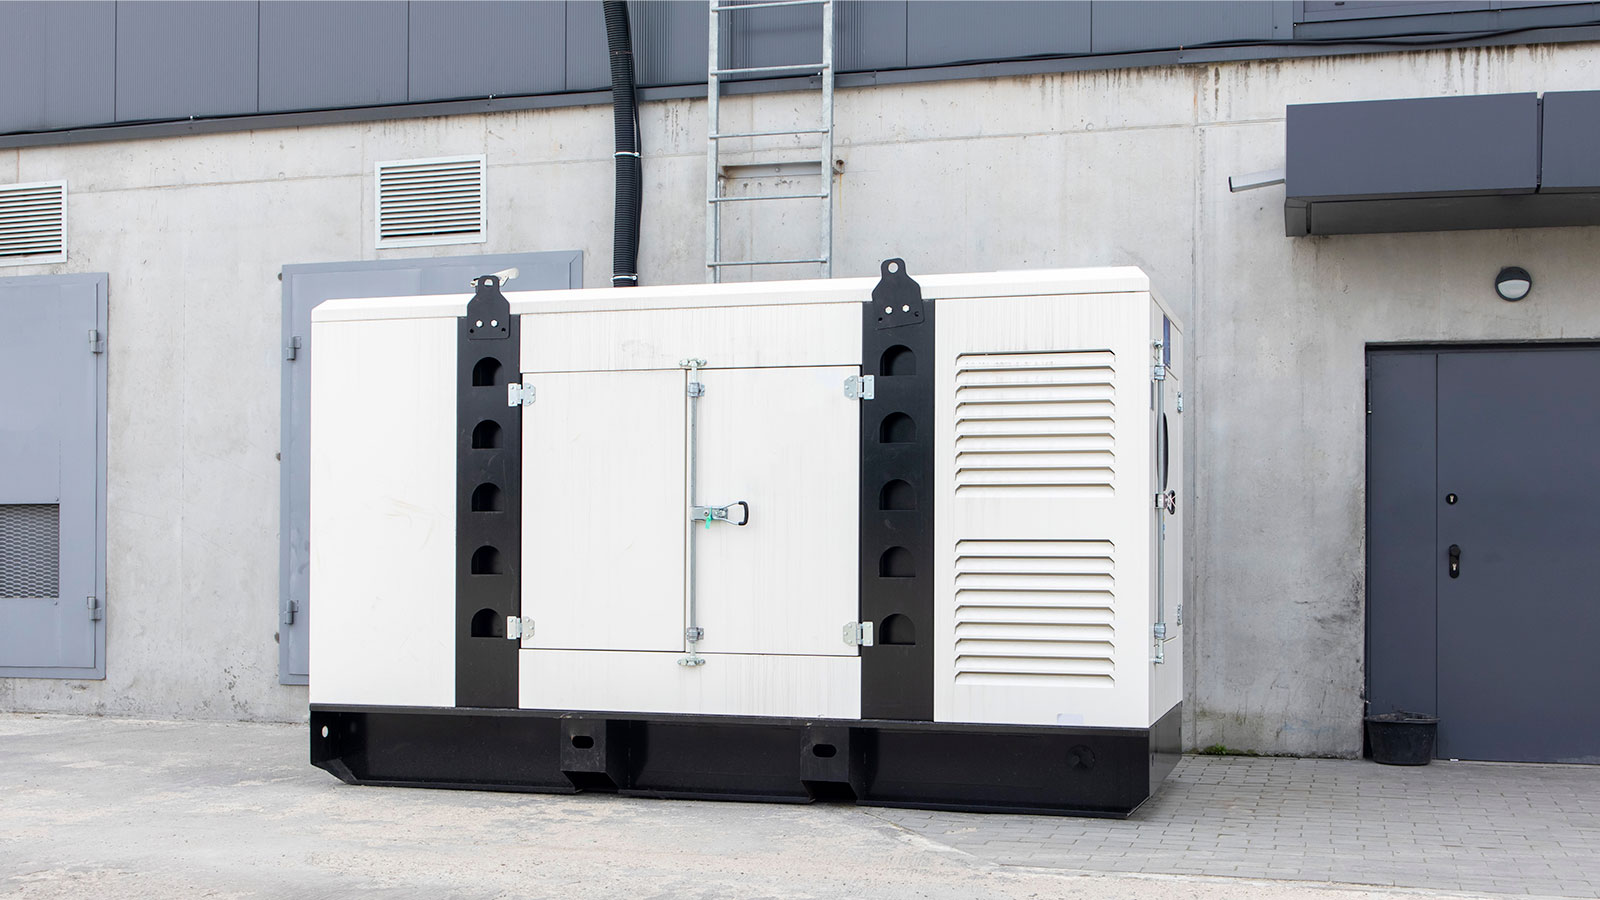 Andrew Keith, Director of load bank manufacturer Power Prove, outlines some of the main risks that arise if generators aren’t regularly tested correctly